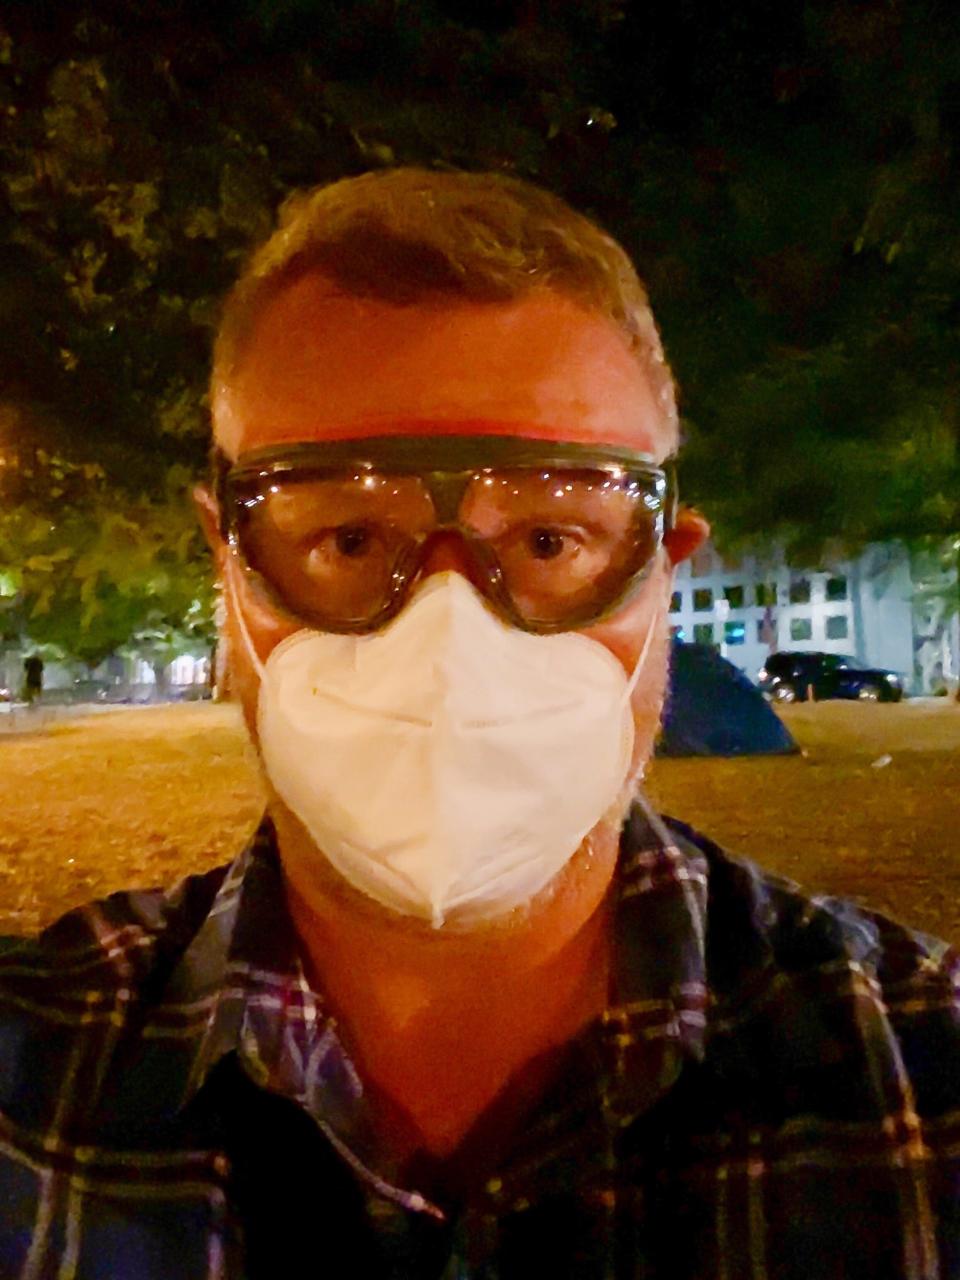 USA TODAY reporter Trevor Hughes on the ground during protests in Portland, Ore.